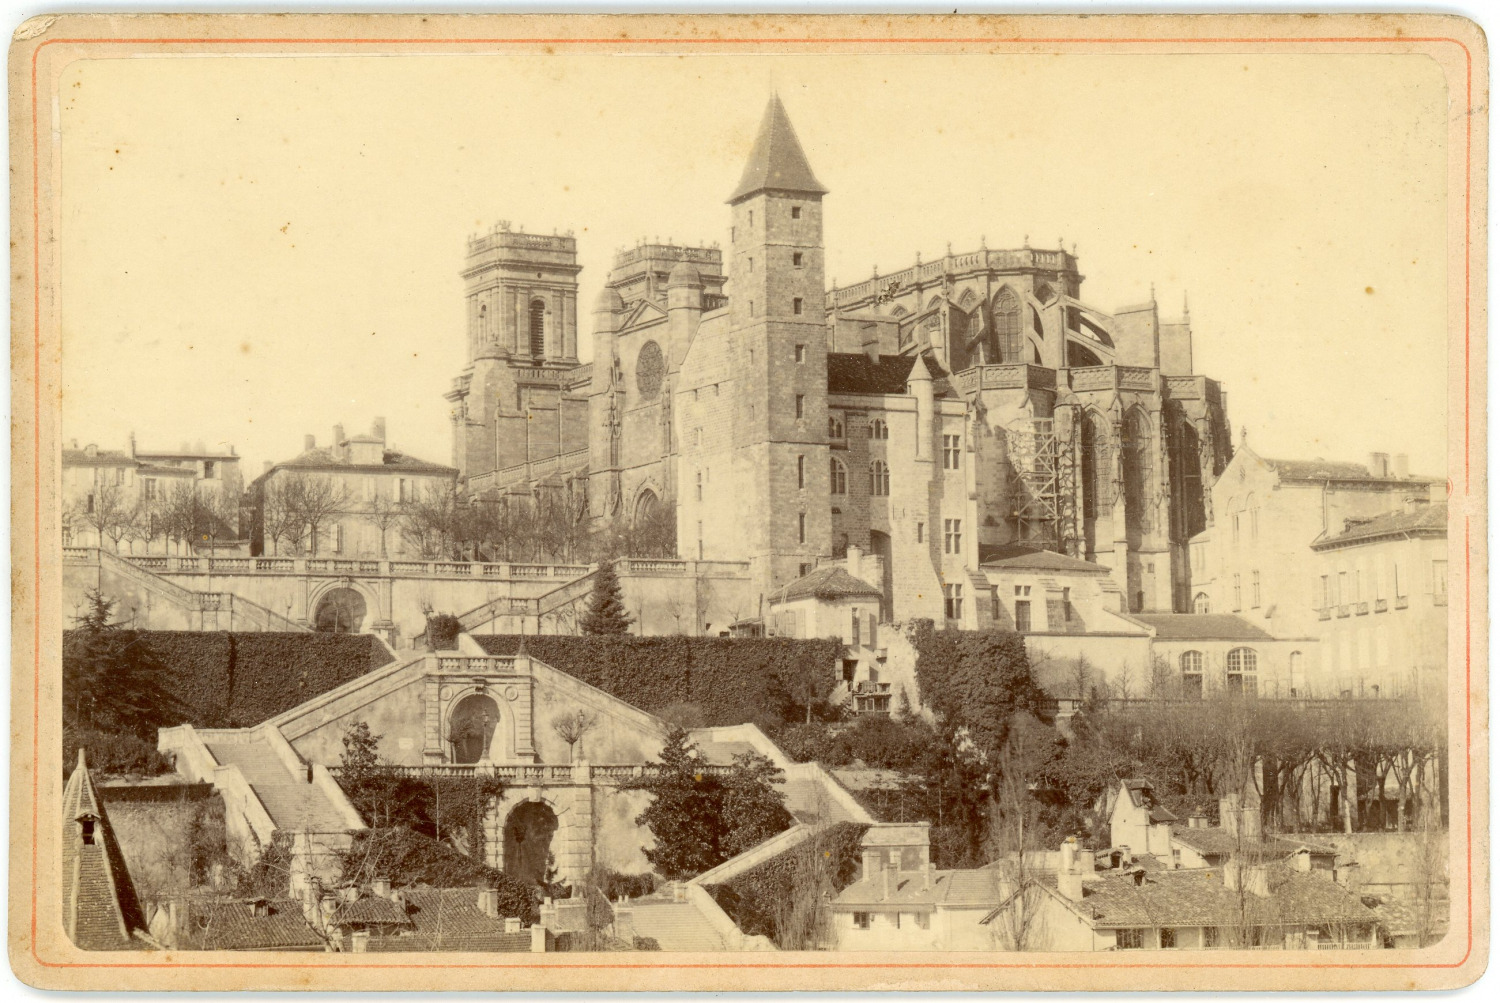 France, Auch, the Cathedral Vintage Albumen Print Albumin Print 11x16.5 